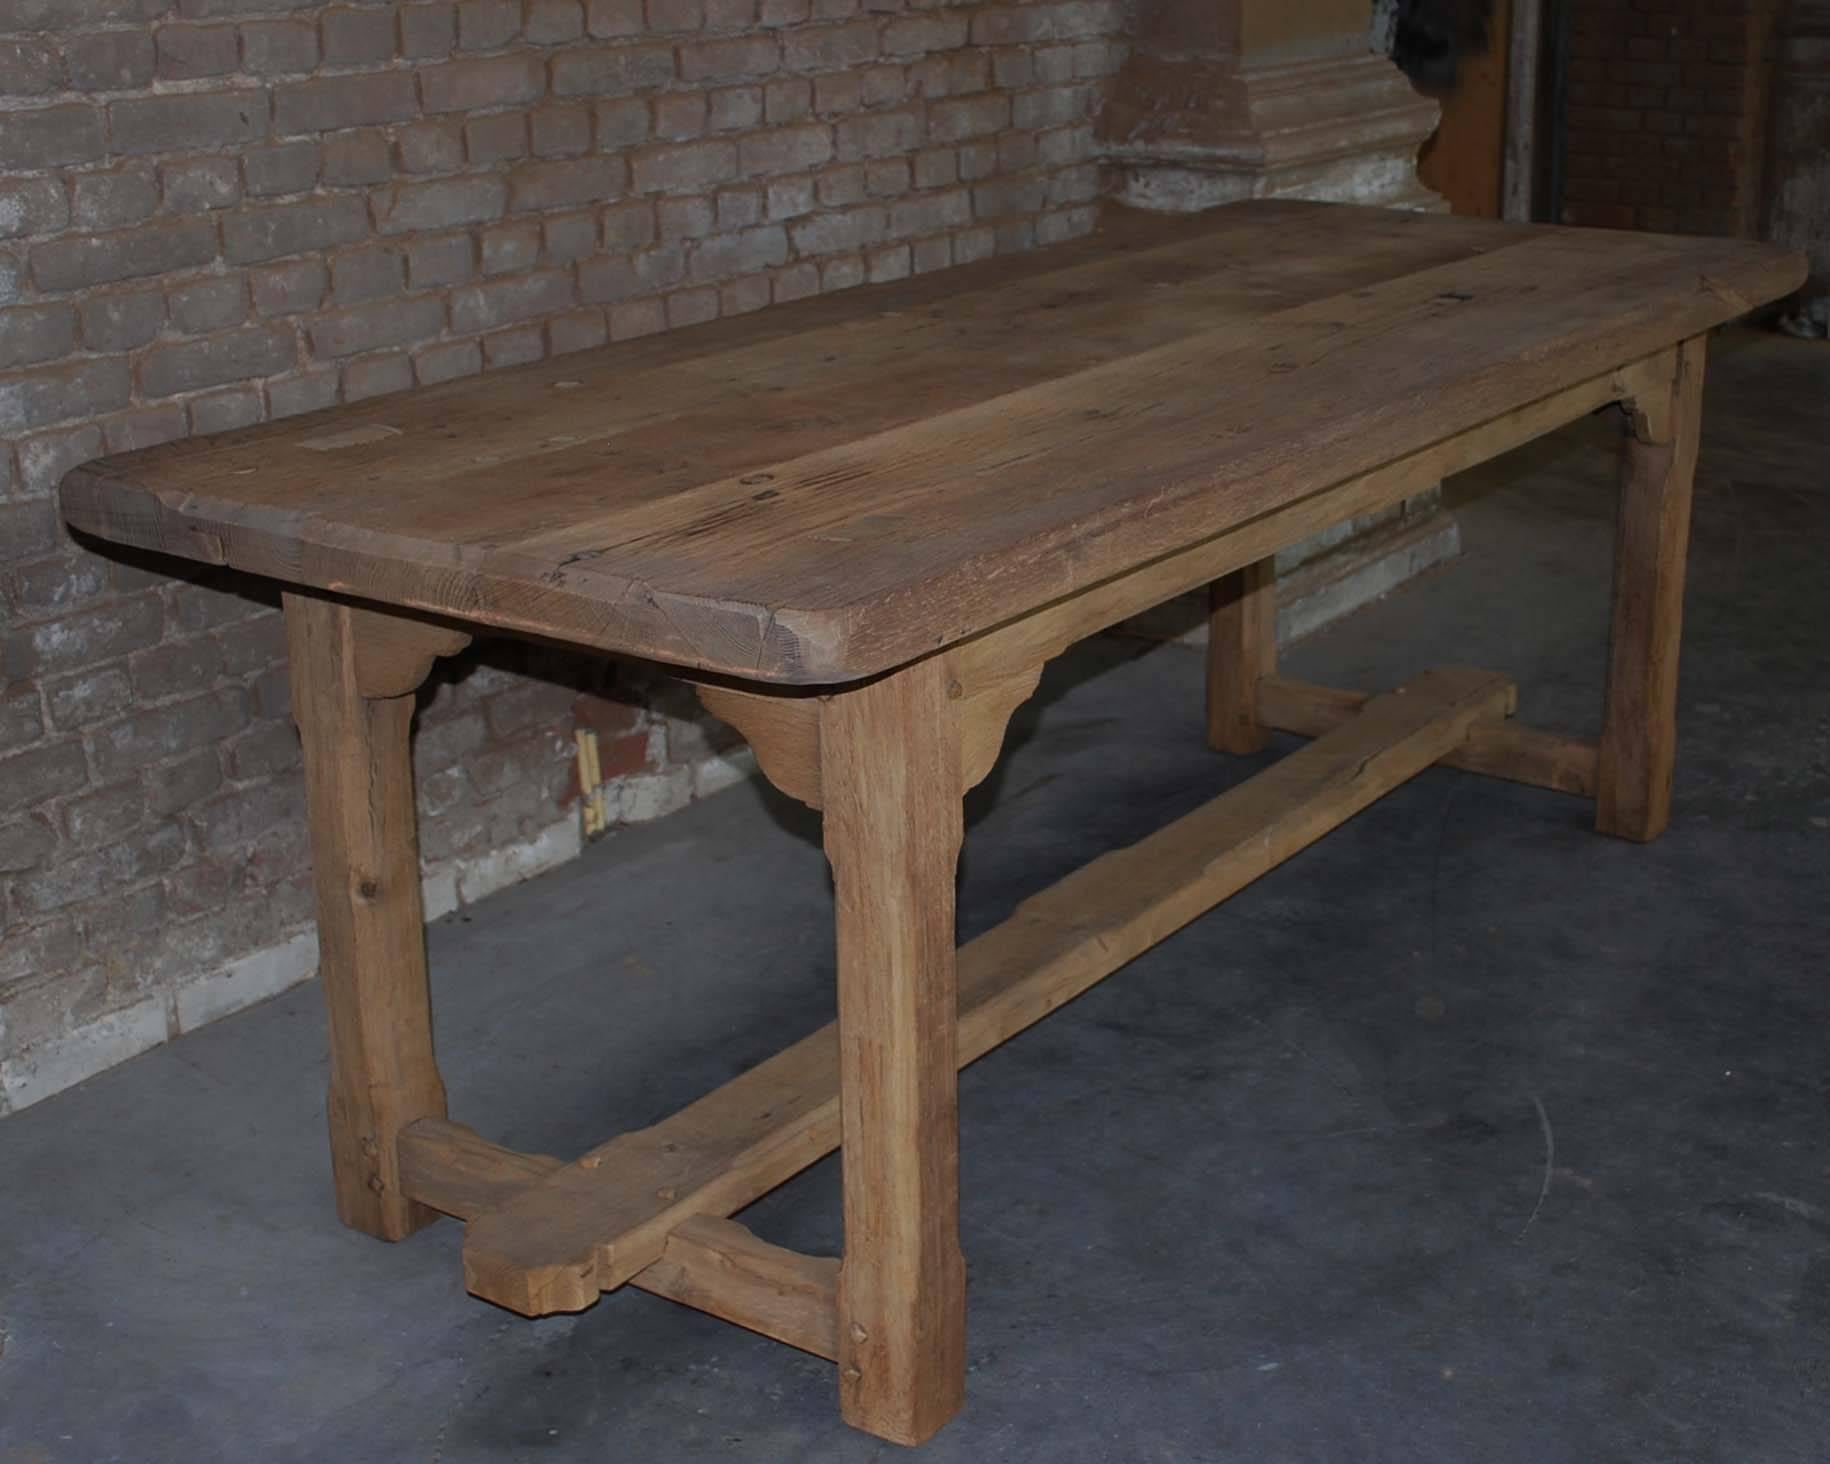 This dining table is made from reclaimed oak beams.
It was made during the 1960s in Veldhoven (the Netherlands) by Piet Rombouts & Sons. They were well-known in the Netherlands for both their antique as well as their new furniture made from